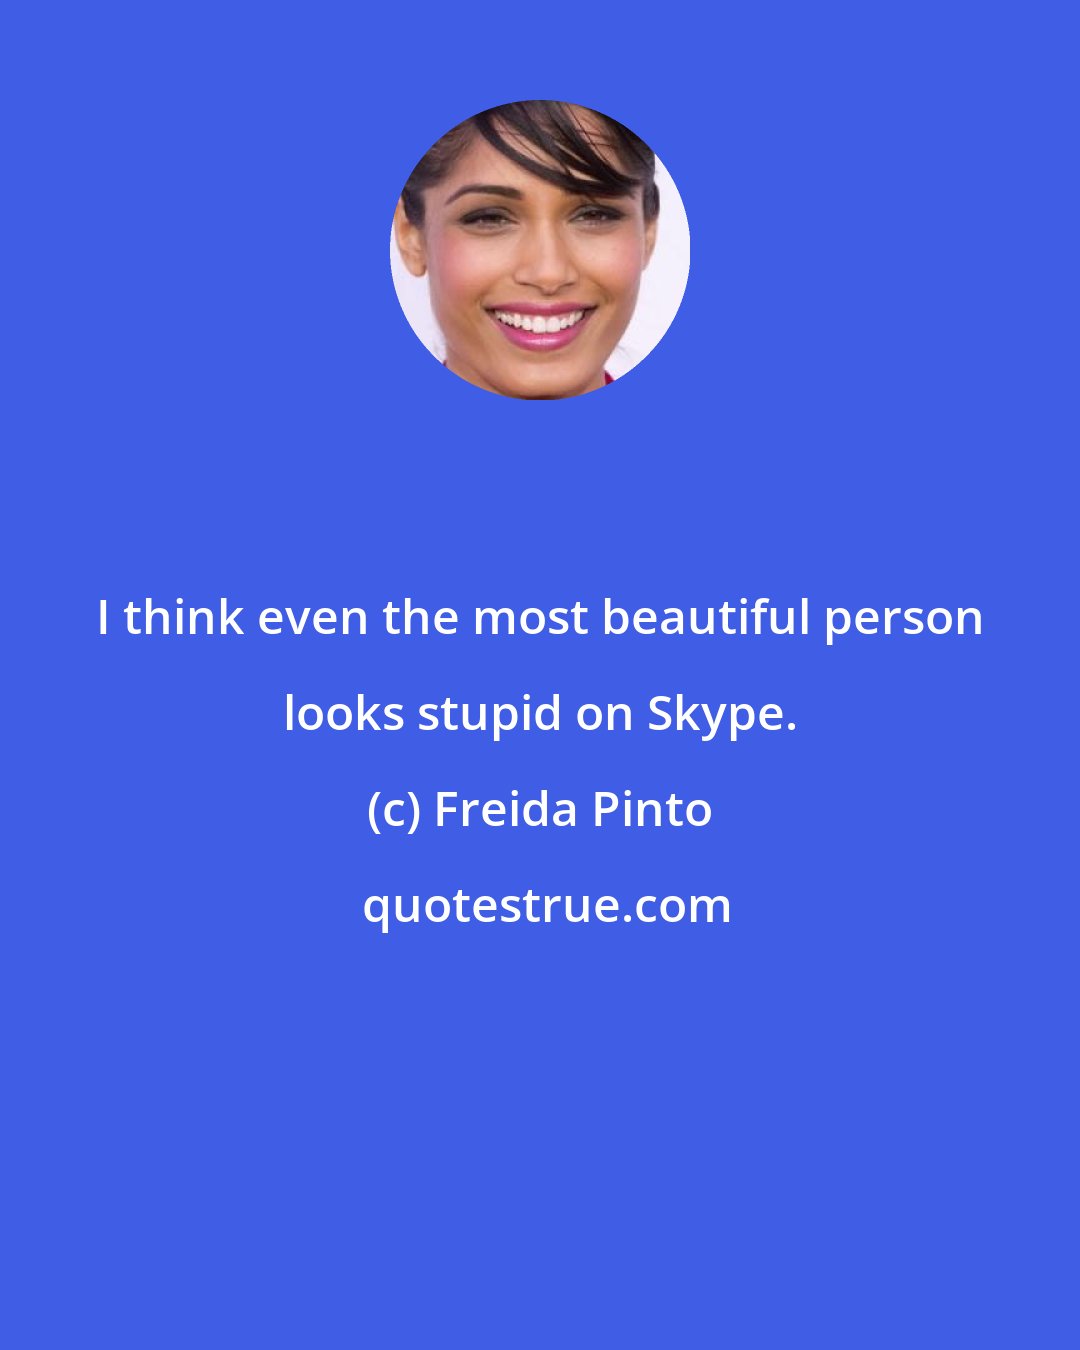 Freida Pinto: I think even the most beautiful person looks stupid on Skype.